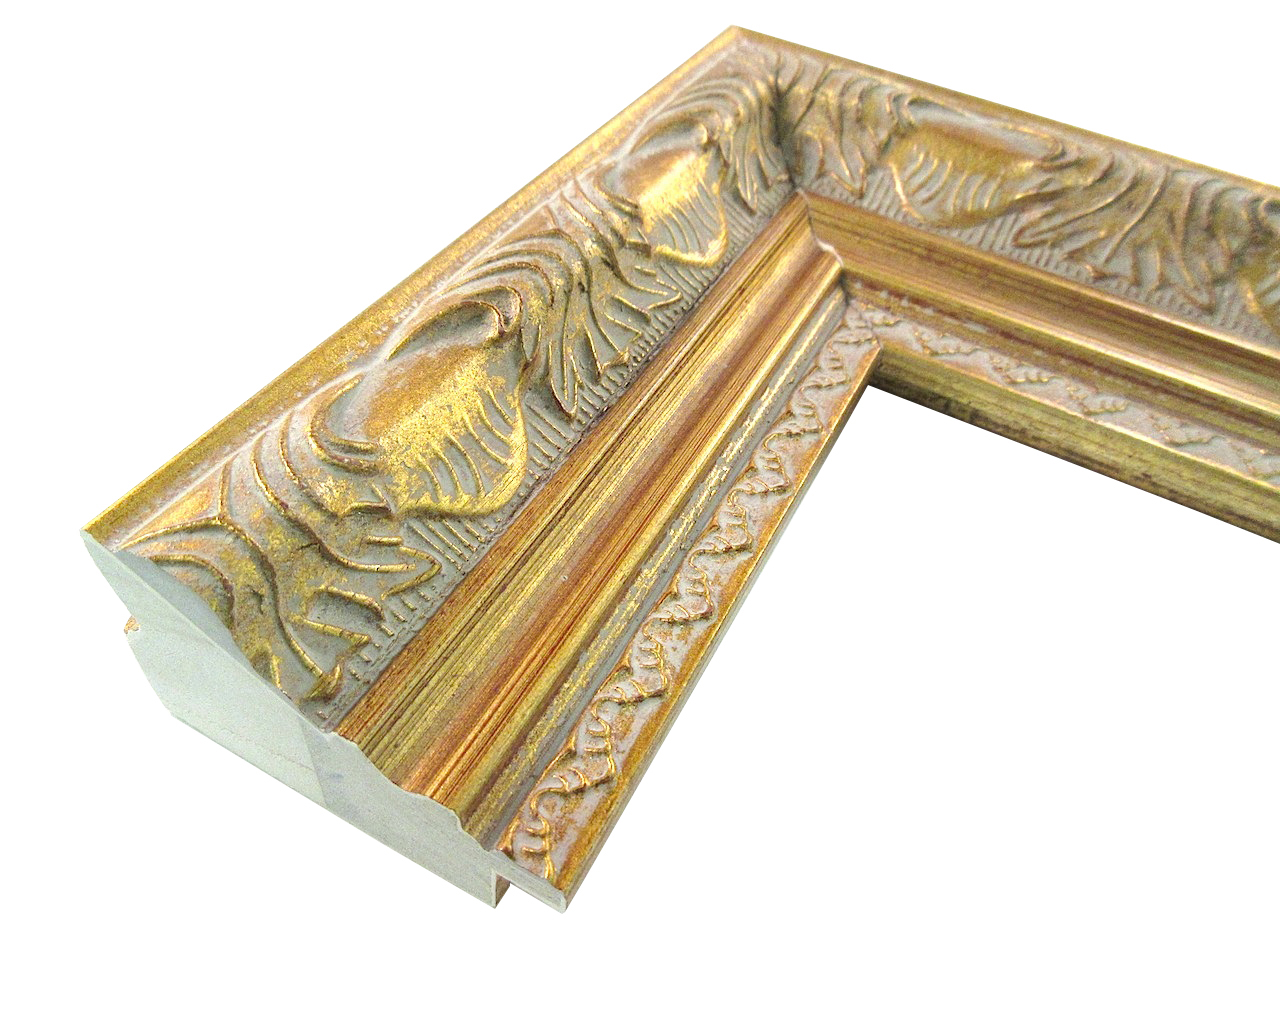 2-1/2 Inch Wide - Gold Ornate Picture Frame Moulding in Lengths